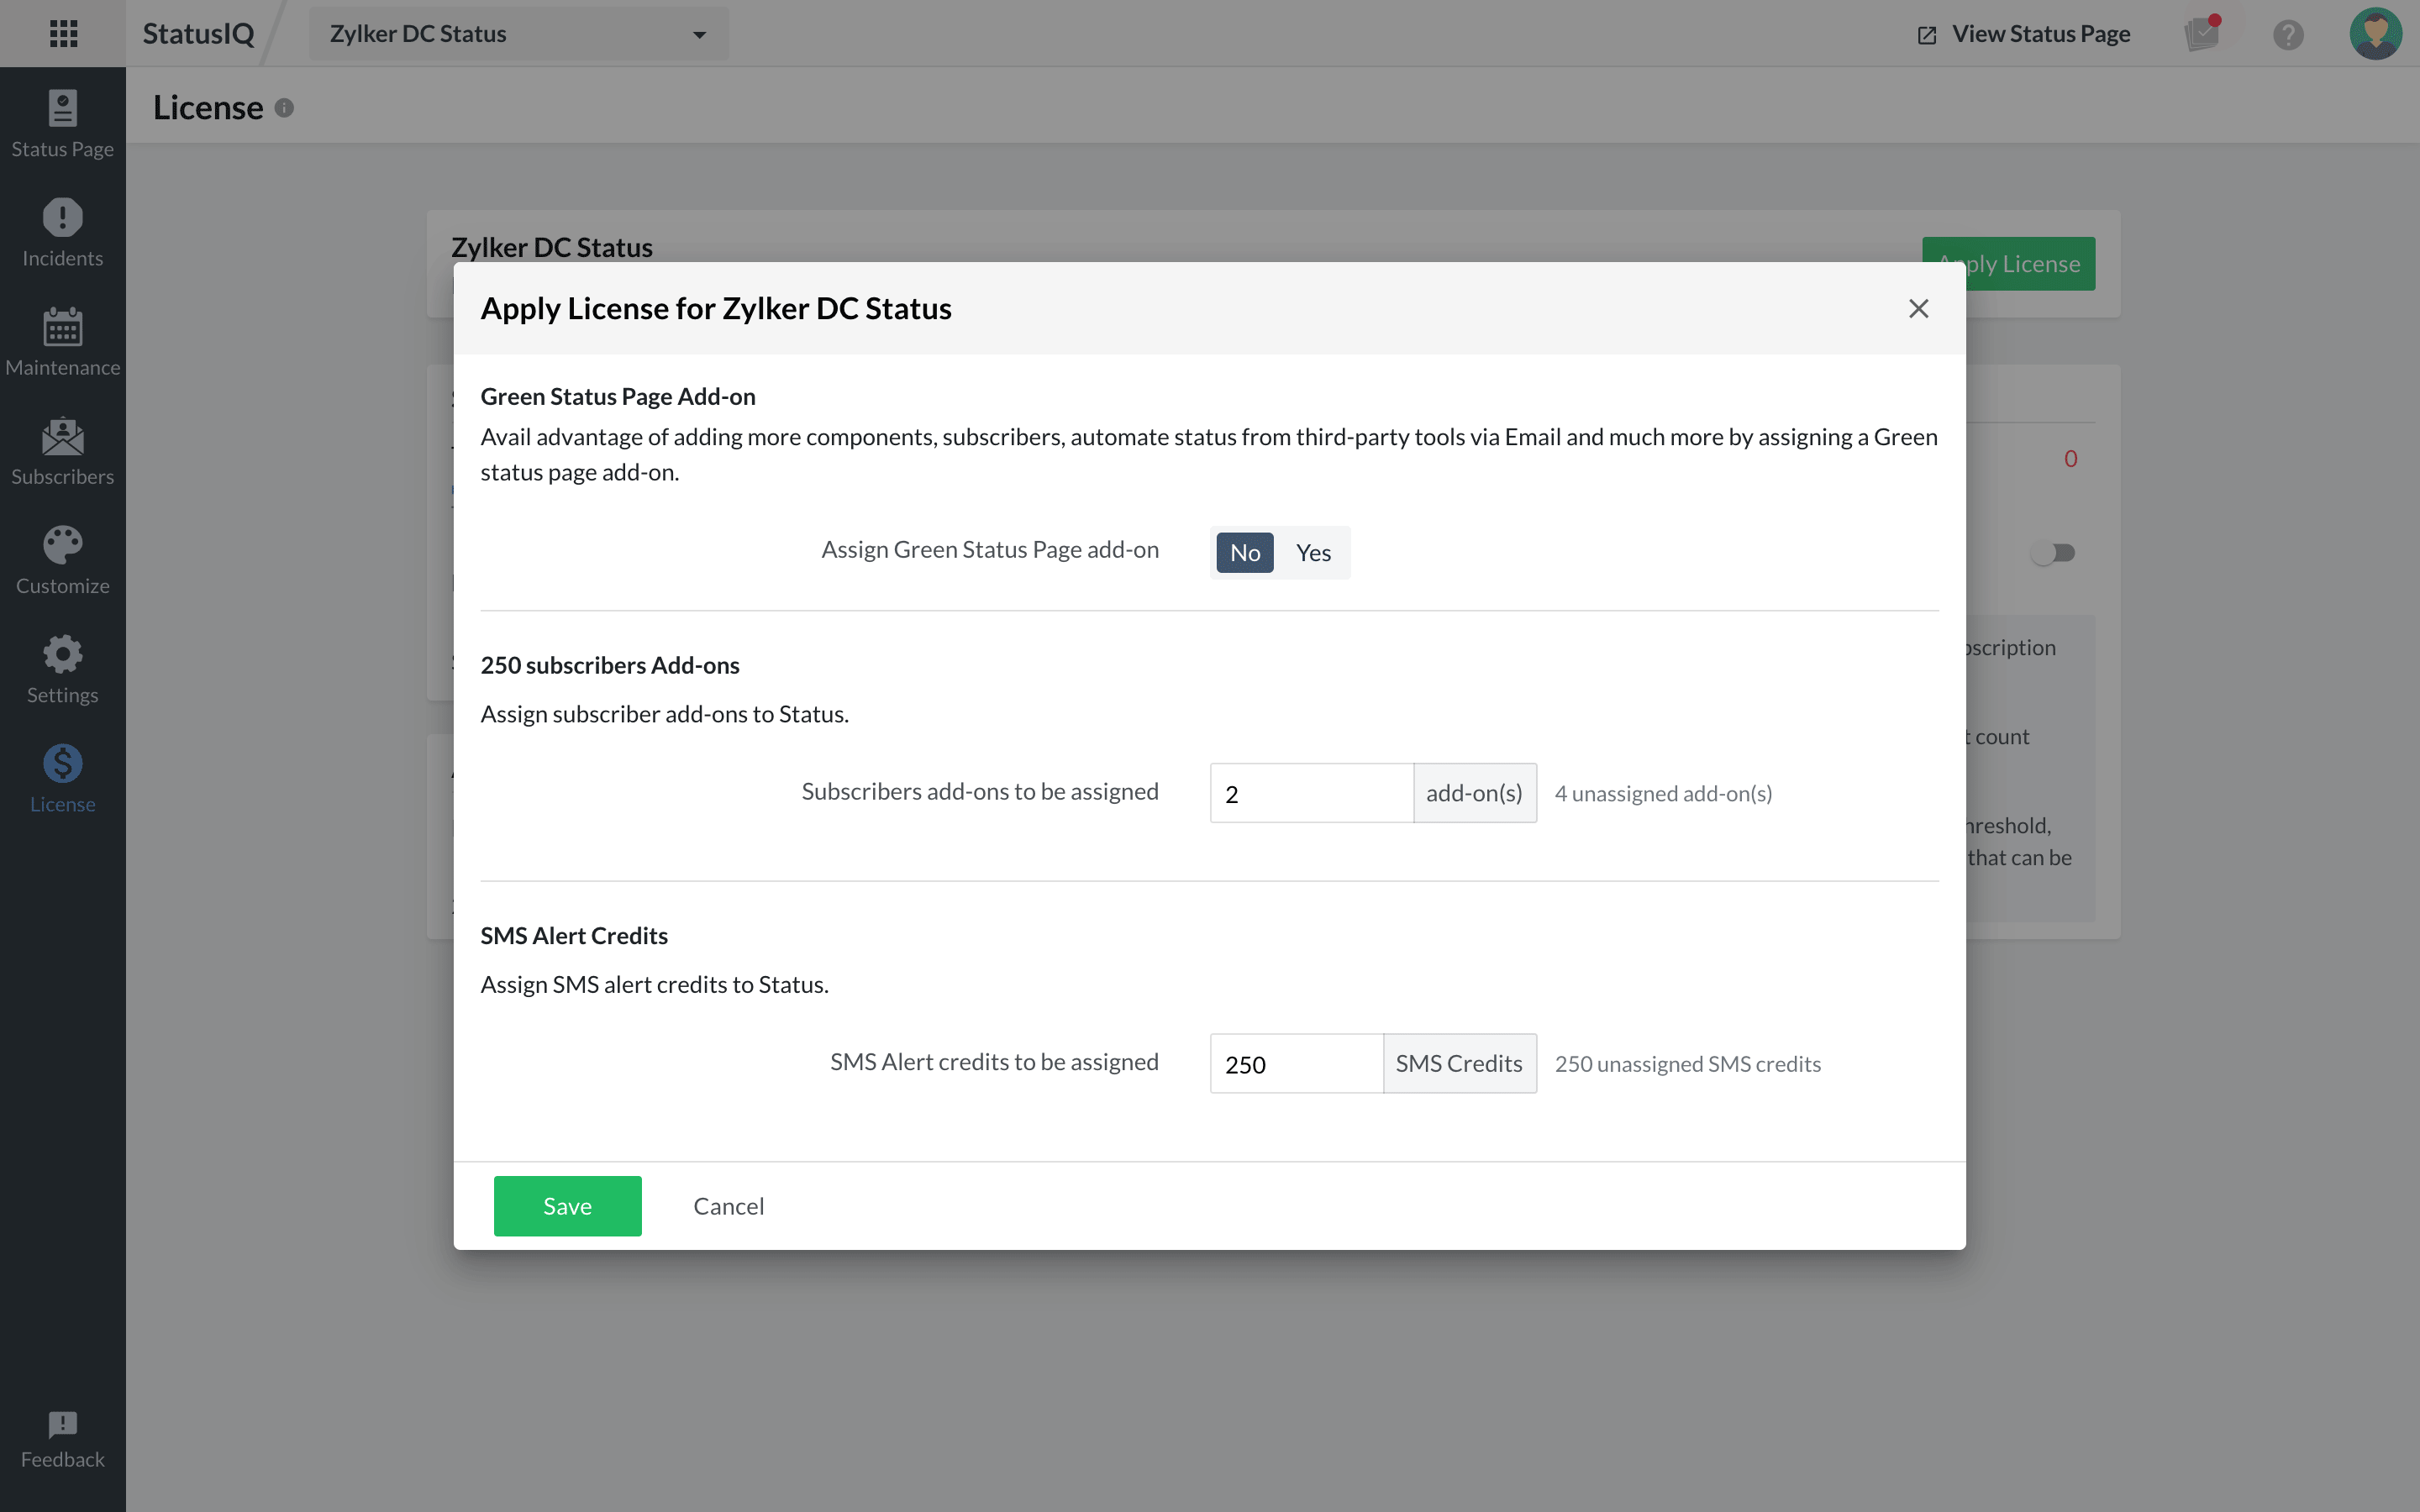 Apply license pop-up where you can add a new license or update an existing one